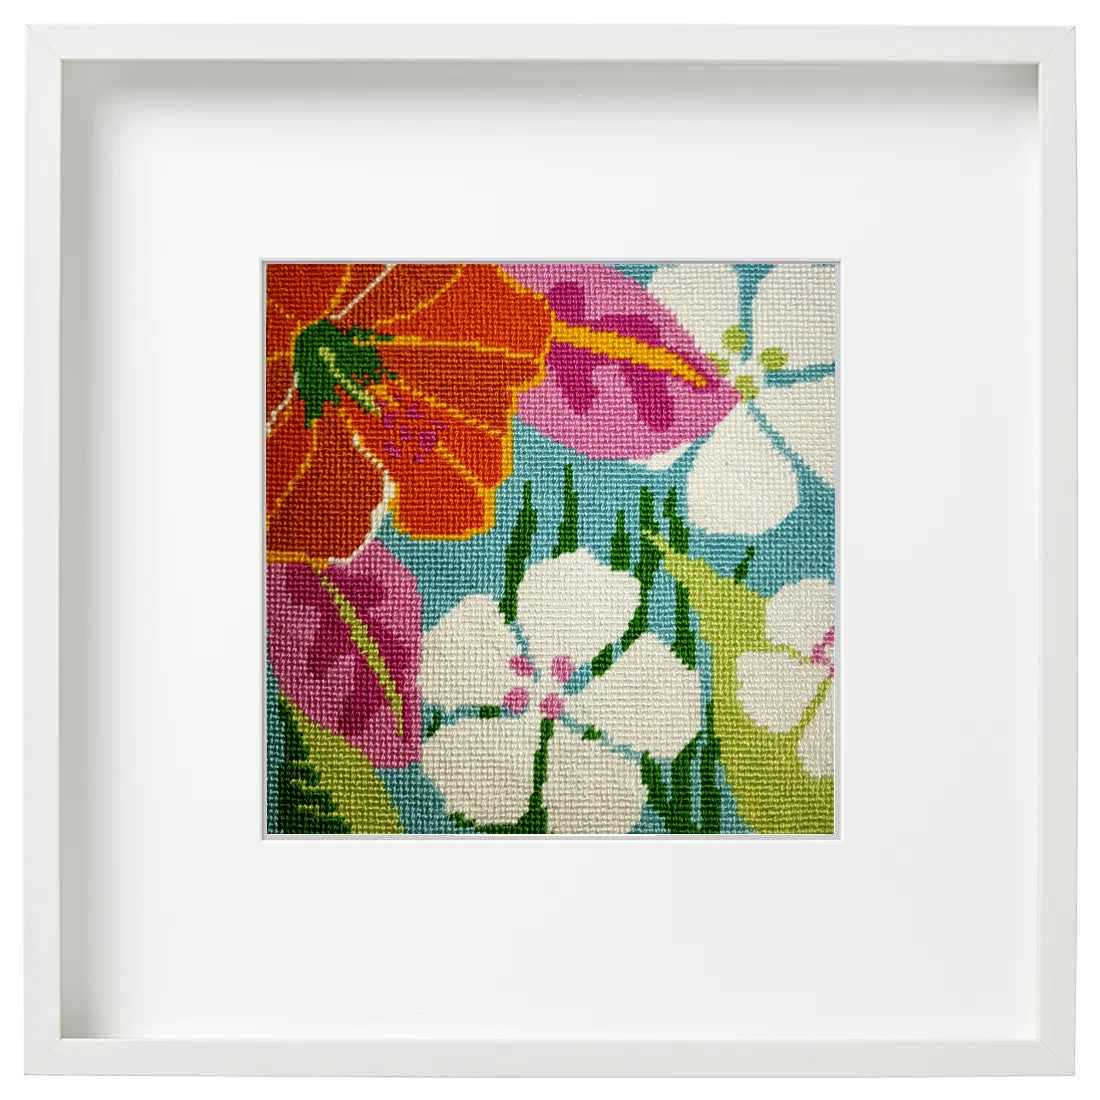 Tropical Flowers needlepoint design shown in a frame.